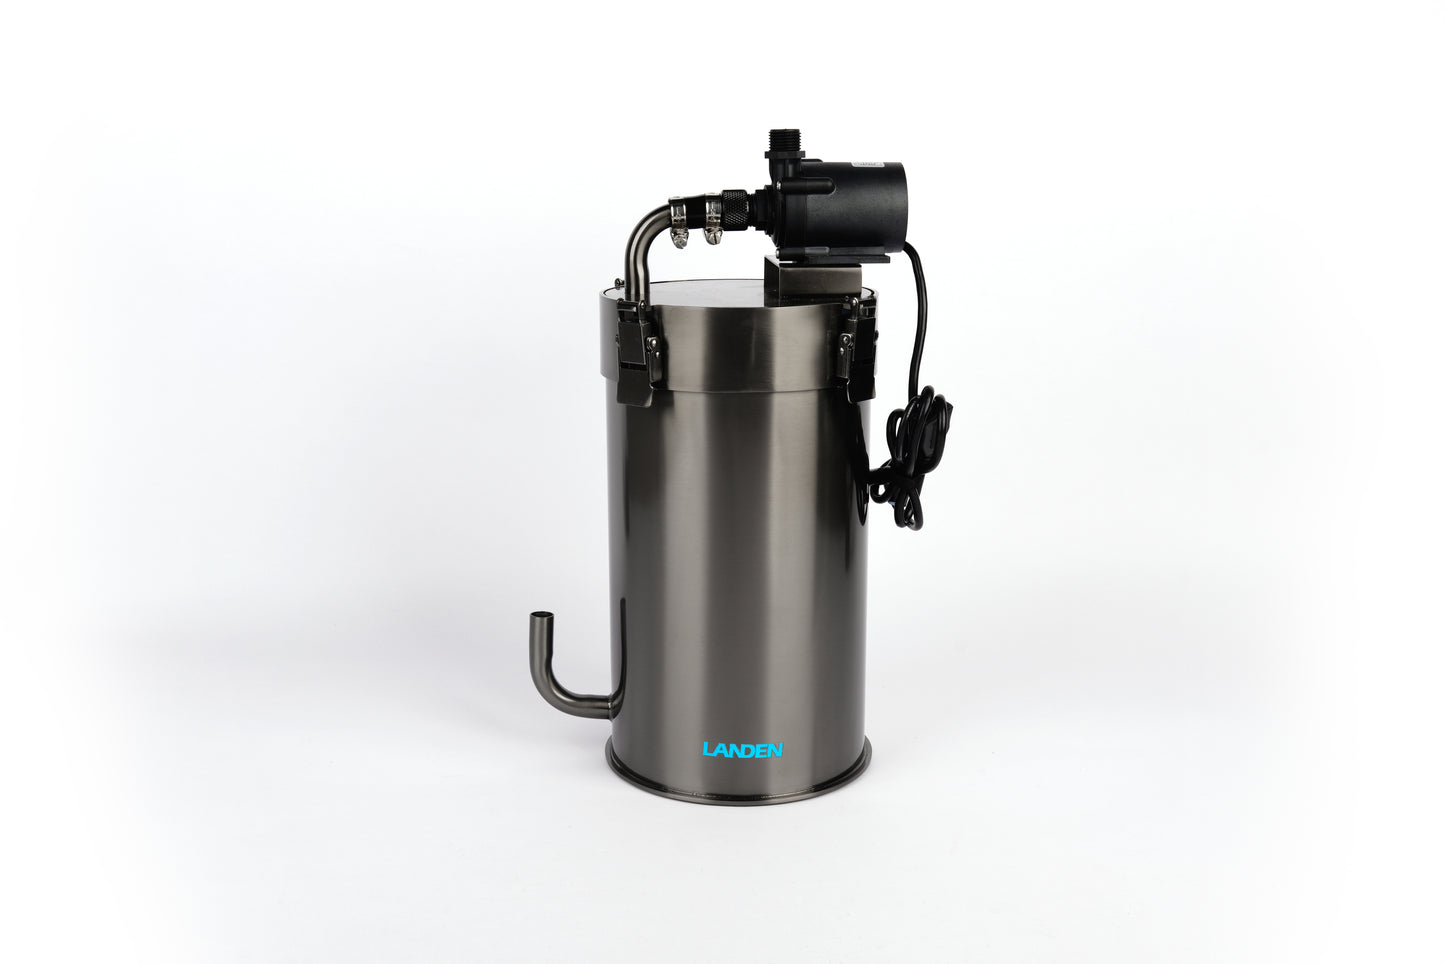 LANDEN PURA External Canister Filter for Aquarium System, Stainless Steel Aquarium Canister with Water Pump